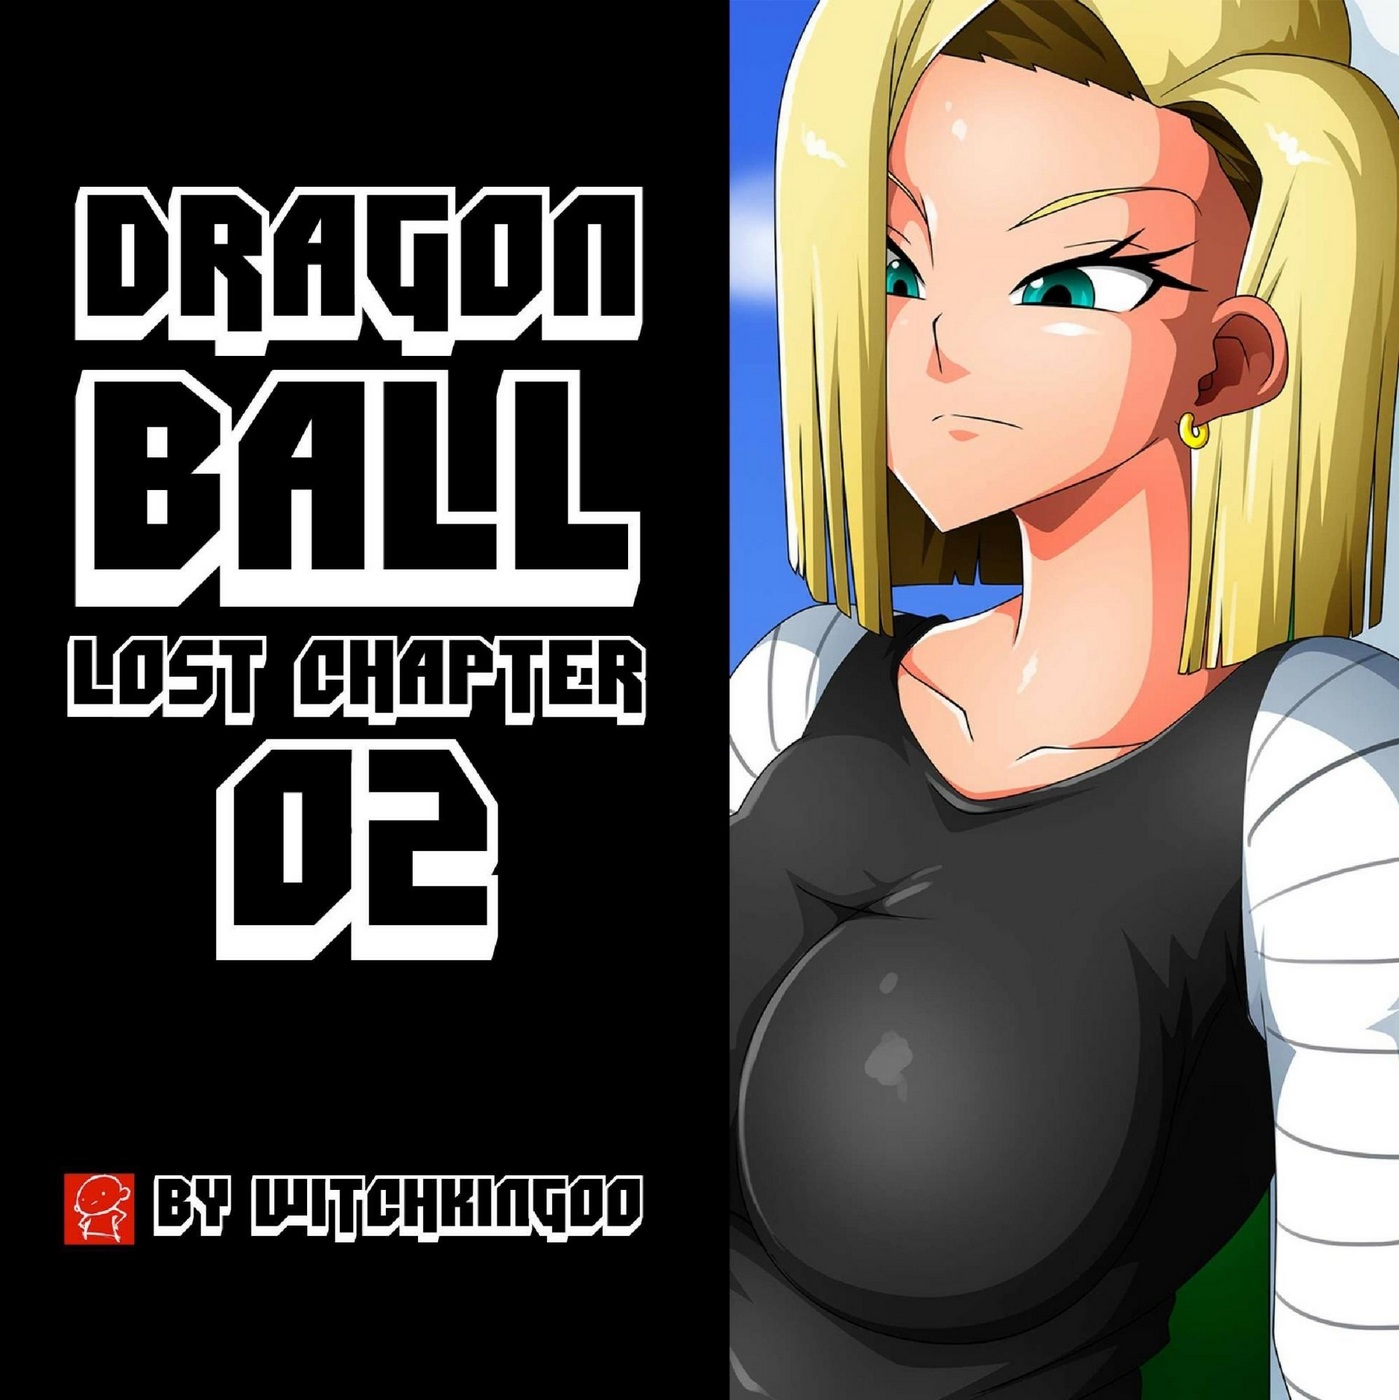 Porn Comics - DragonBall Lost Chapter 02- Witchking00 porn comics 8 muses